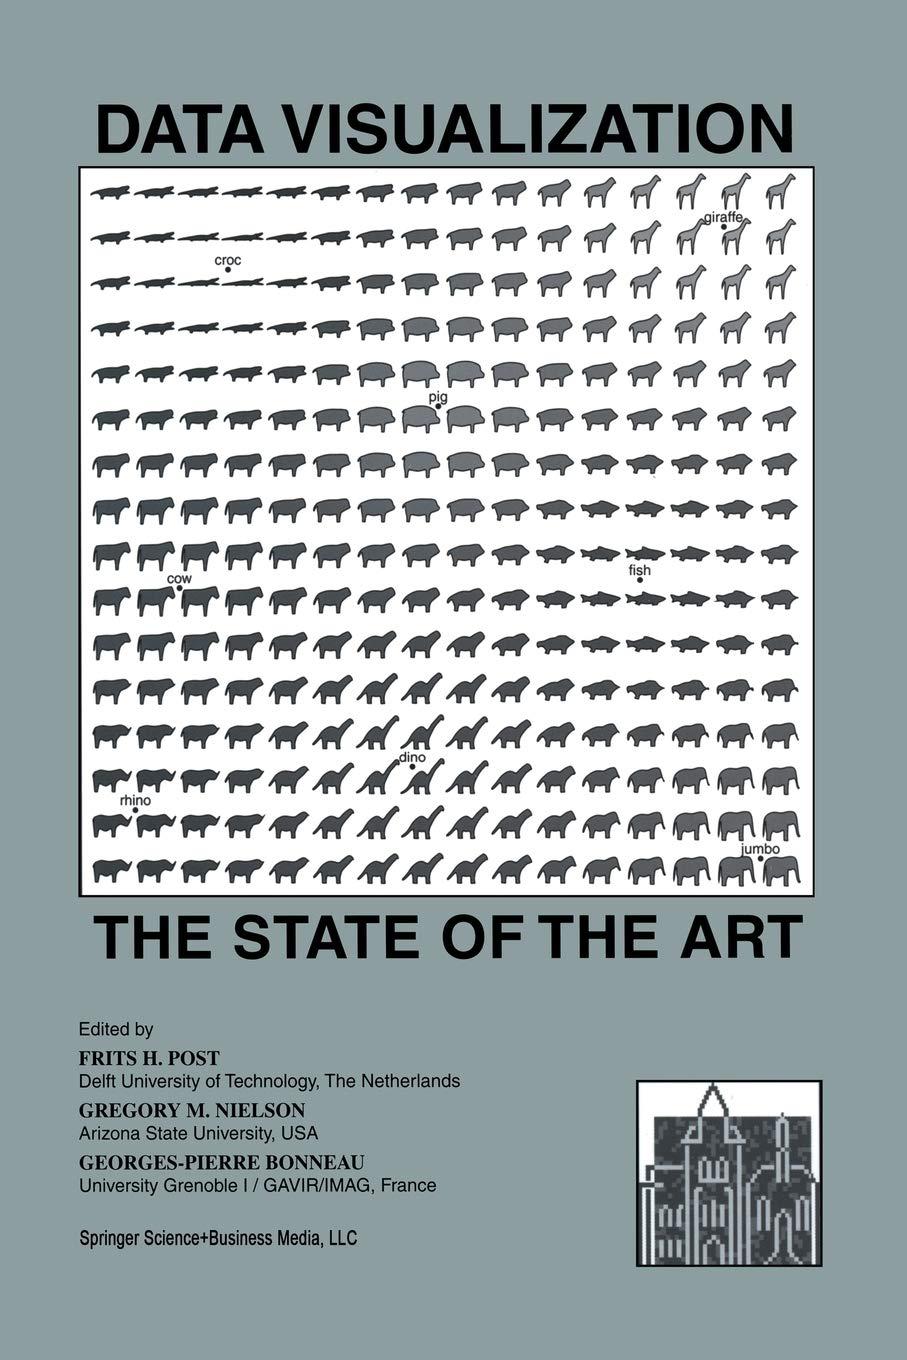 data visualization the state of the art 2003 edition frits h. post, gregory m. nielson, georges-pierre